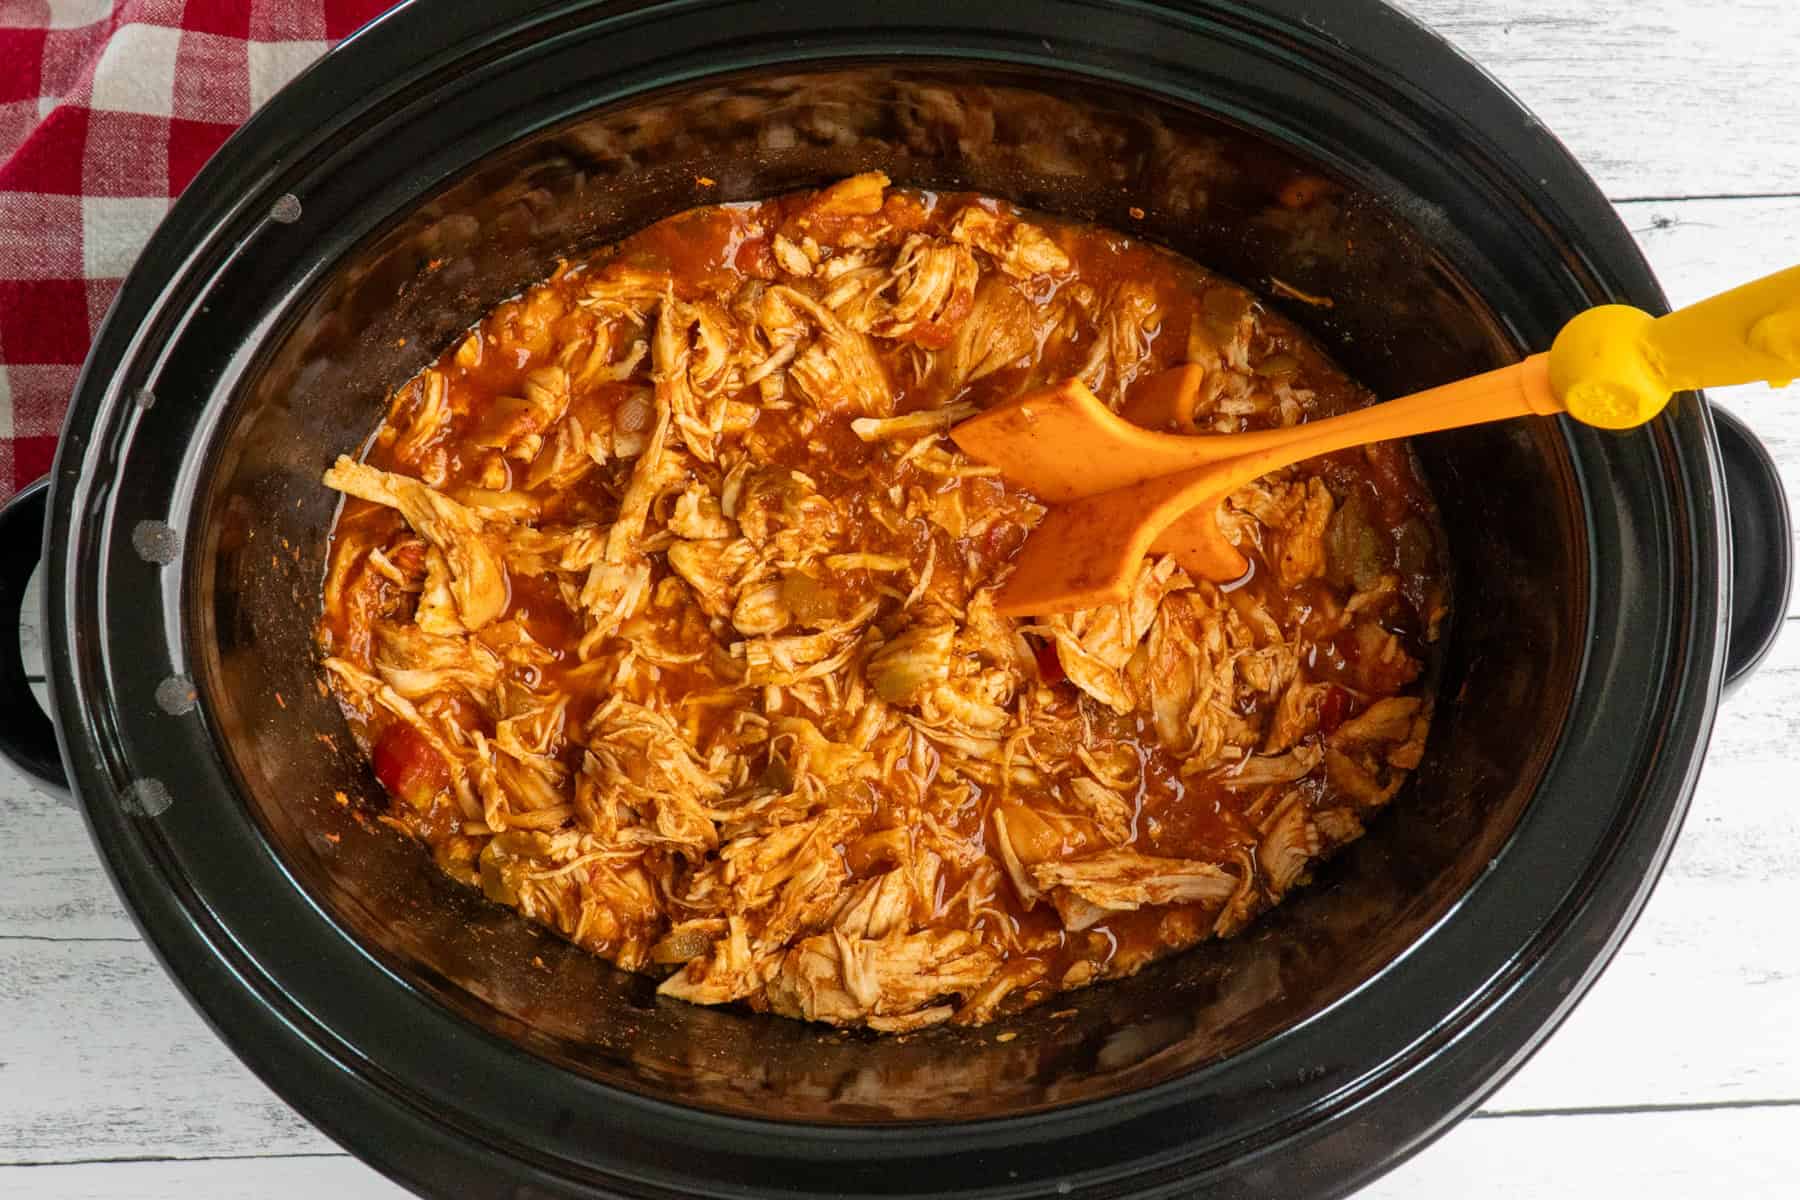 Mexican shredded chicken in a crock pot.